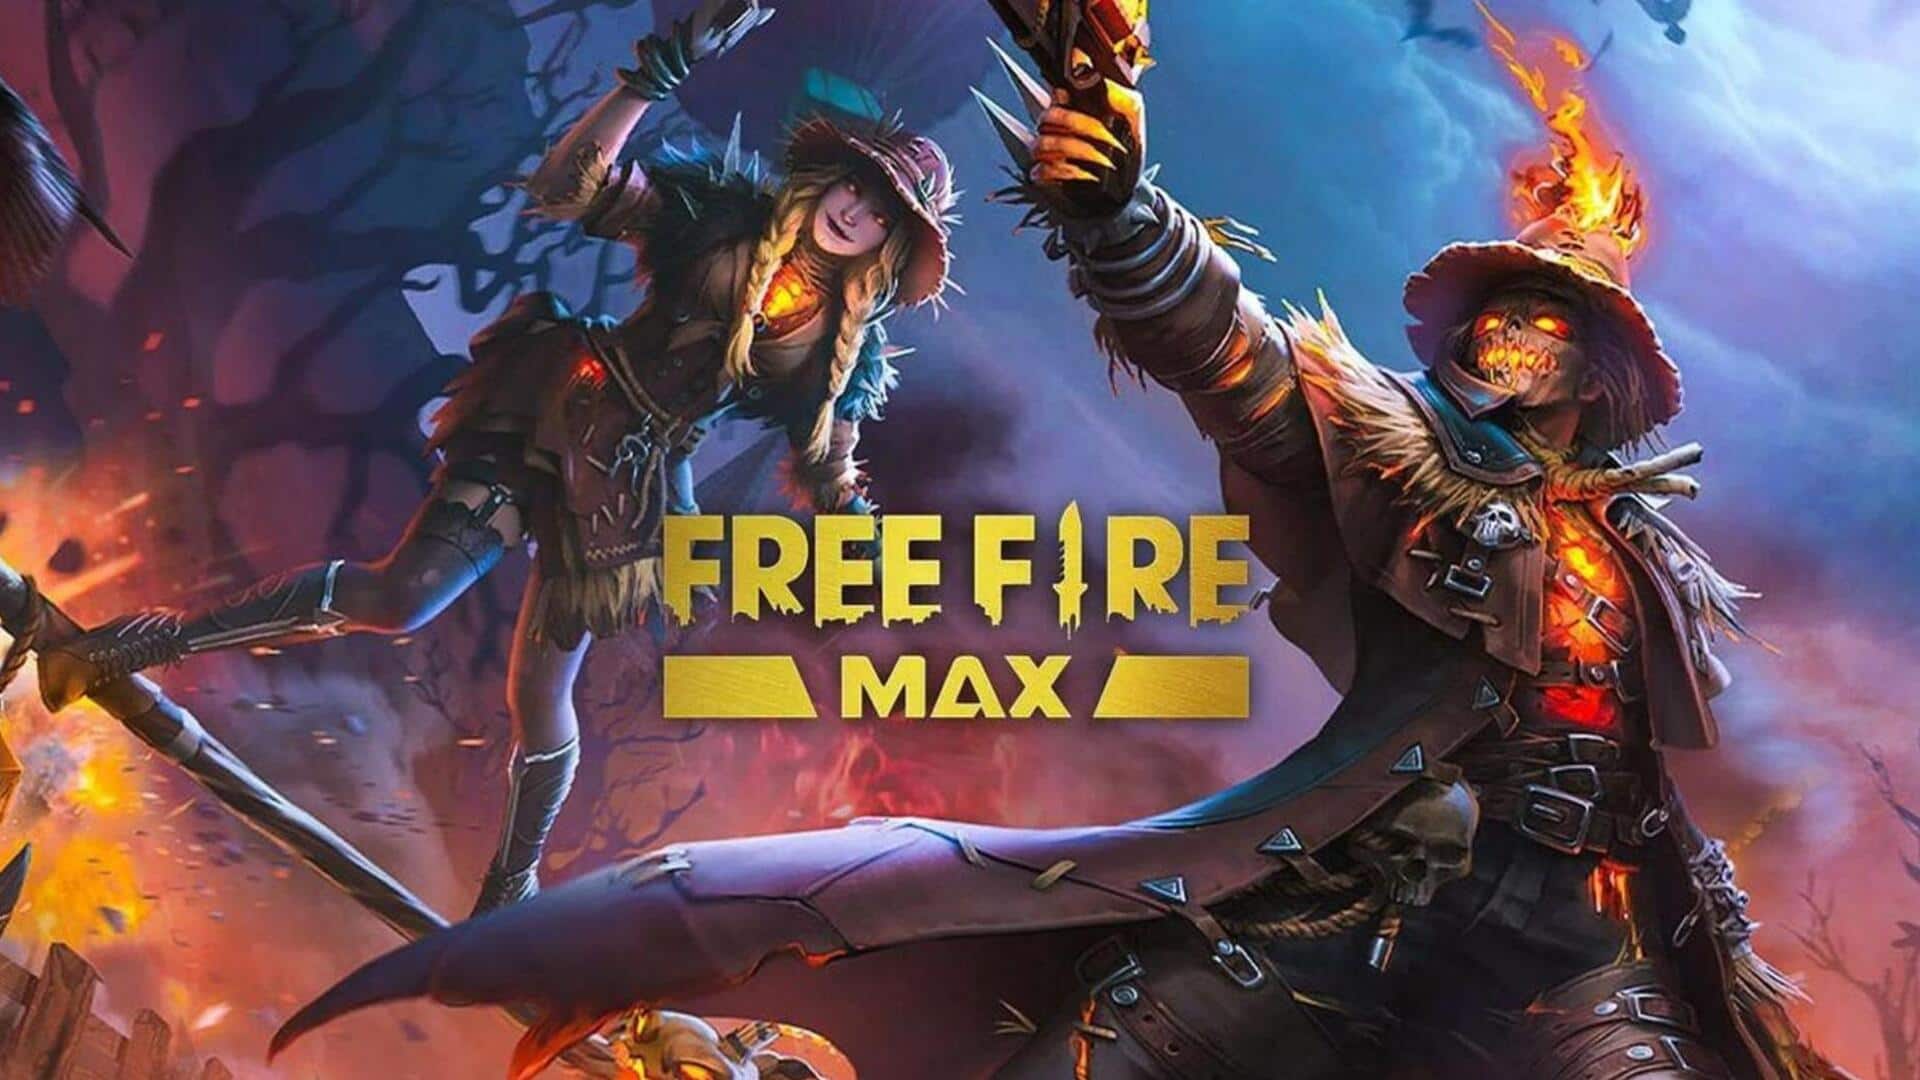 Free Fire MAX codes for November 17: Claim exclusive rewards